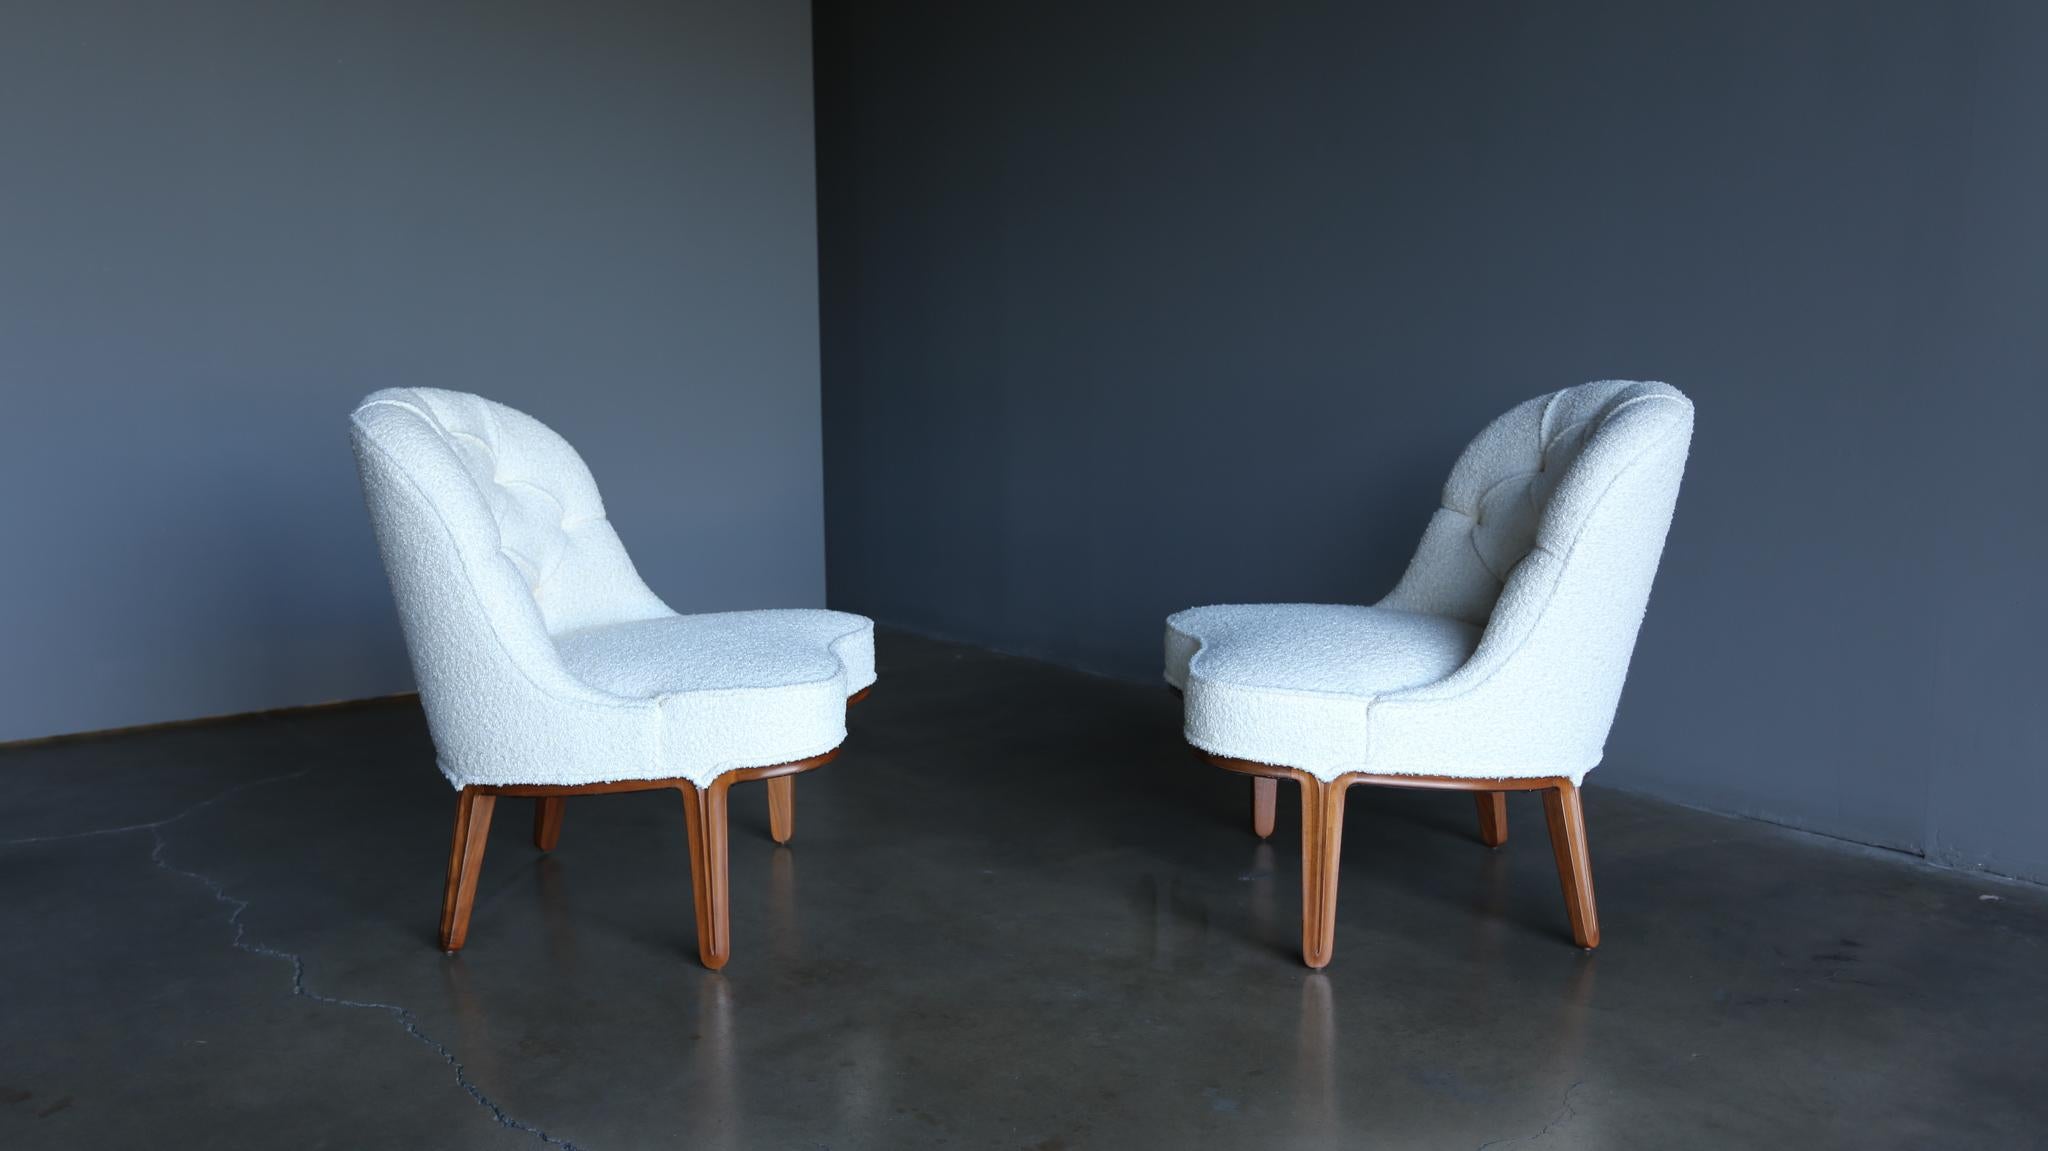 Edward Wormley Janus slipper lounge chairs for Dunbar, Circa 1955. This pair has been professionally restored in cream bouclé.